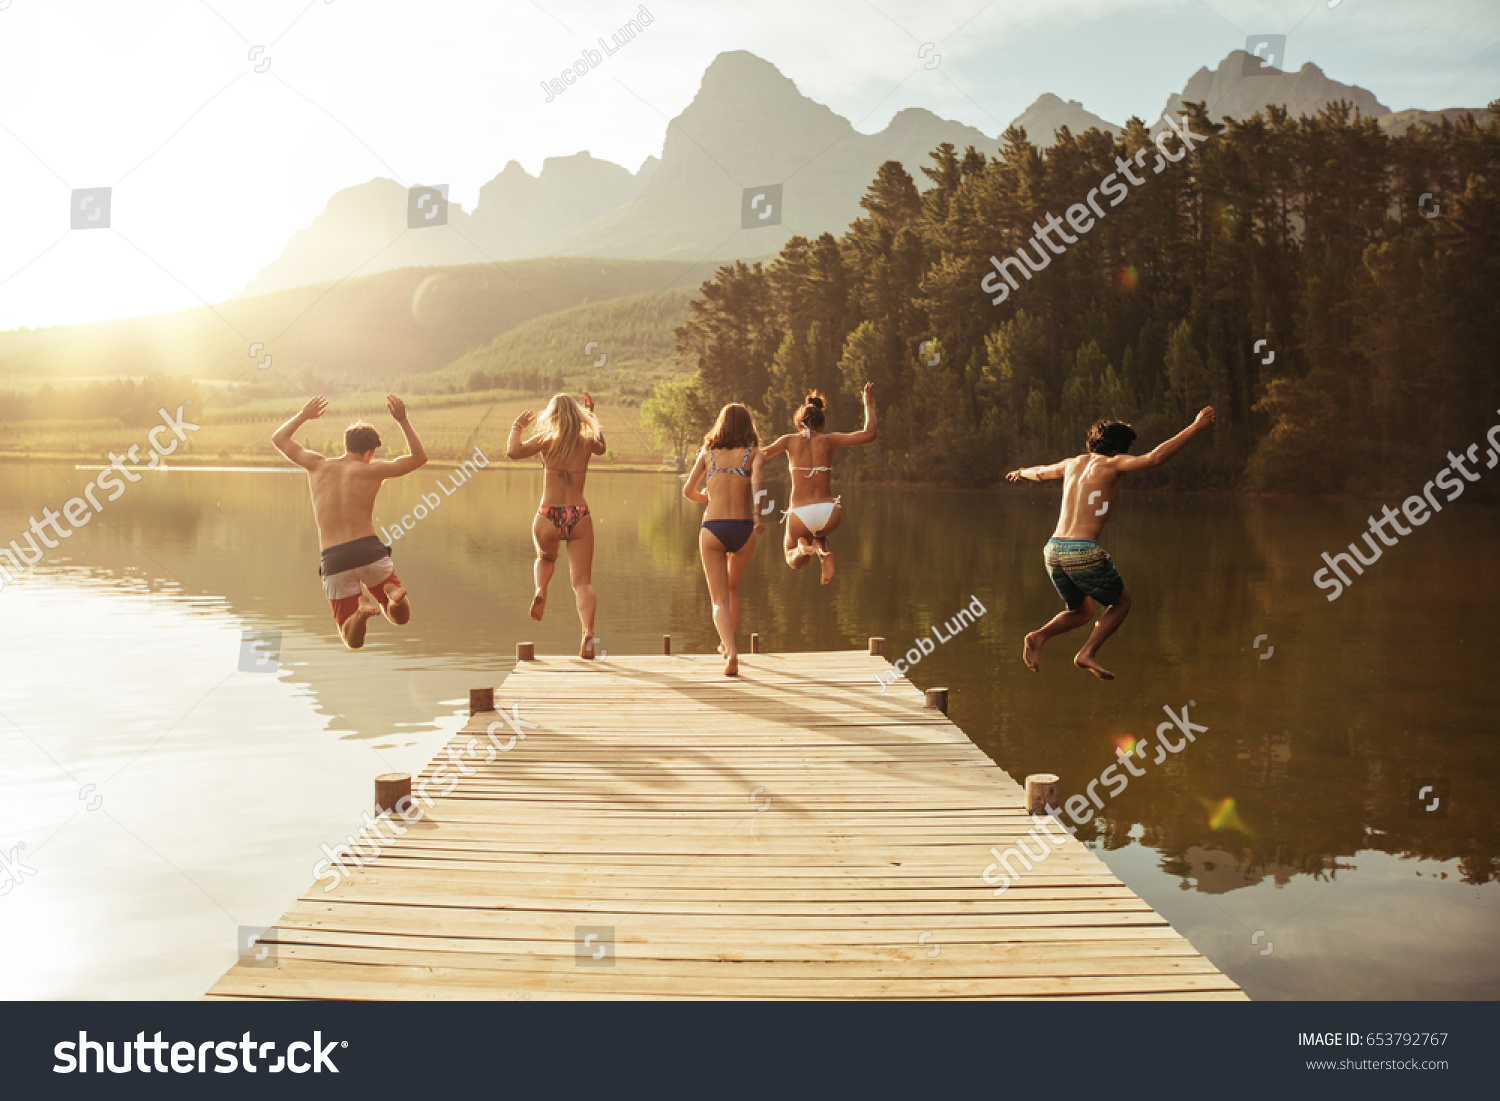 Group of young people jumping into the water from a jetty. Group of friends jumping from pier in the lake on a sunny day. #653792767